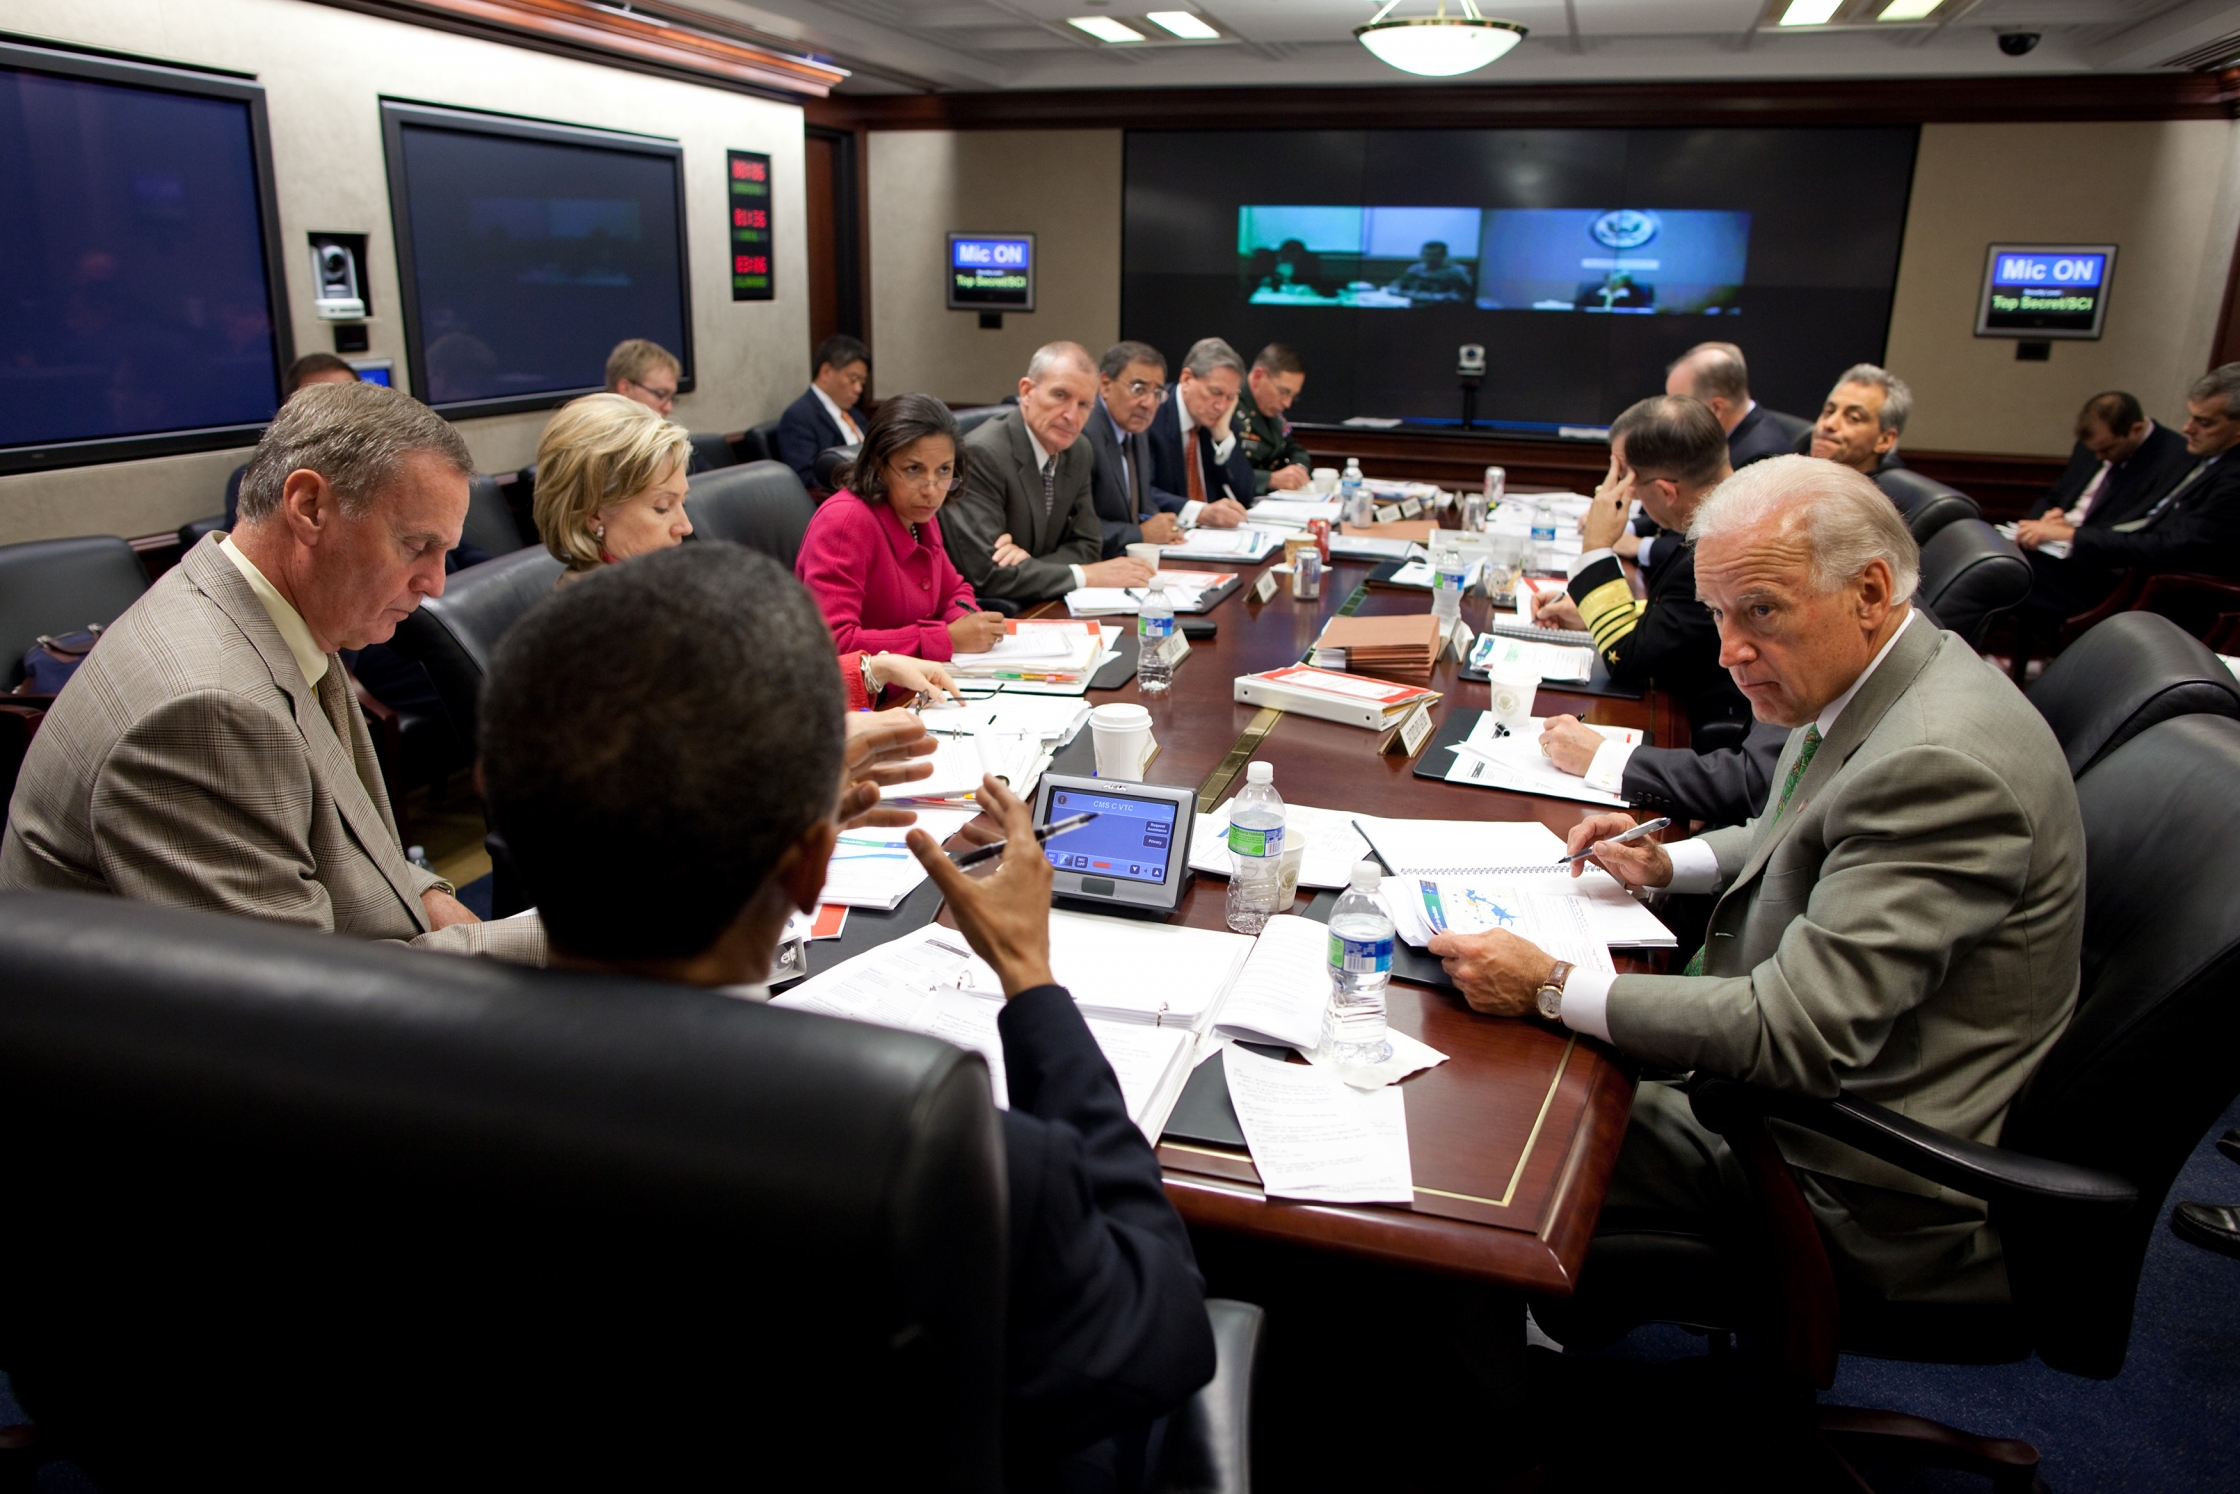 President Barack Obama attends a briefing on Afghanistan in the Situation Room of the White House, Oct. 9, 2009. (Official White House Photo by Pete Souza)